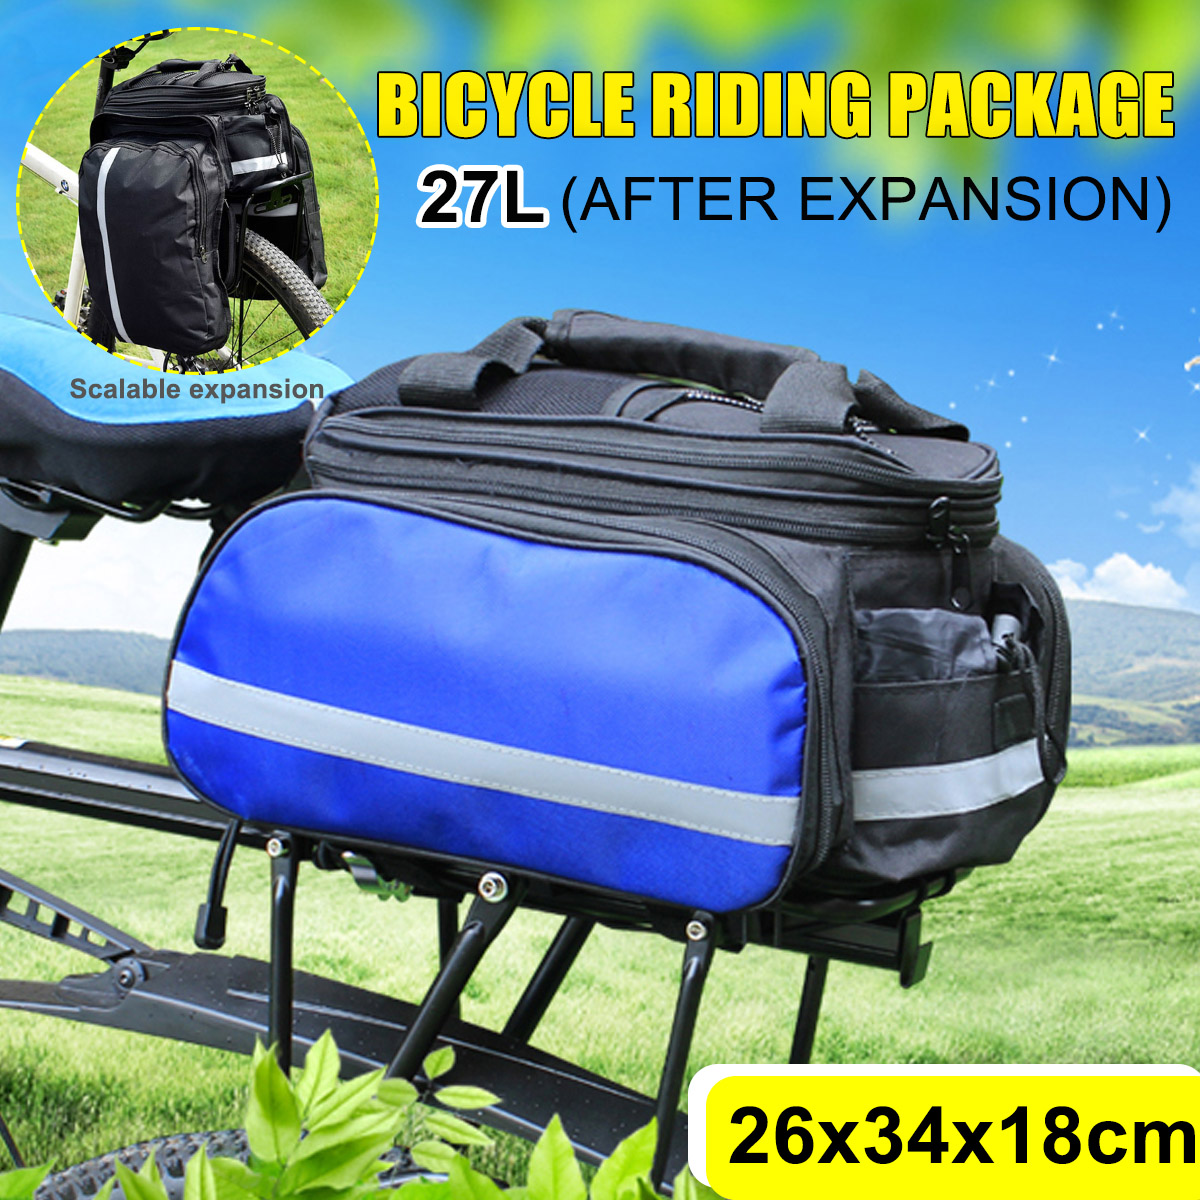 27L-Bicycle-Riding-Package-Large-Capacity-Waterproof-Reflective-Strips-Outdoor-Riding-Bag-1874551-1